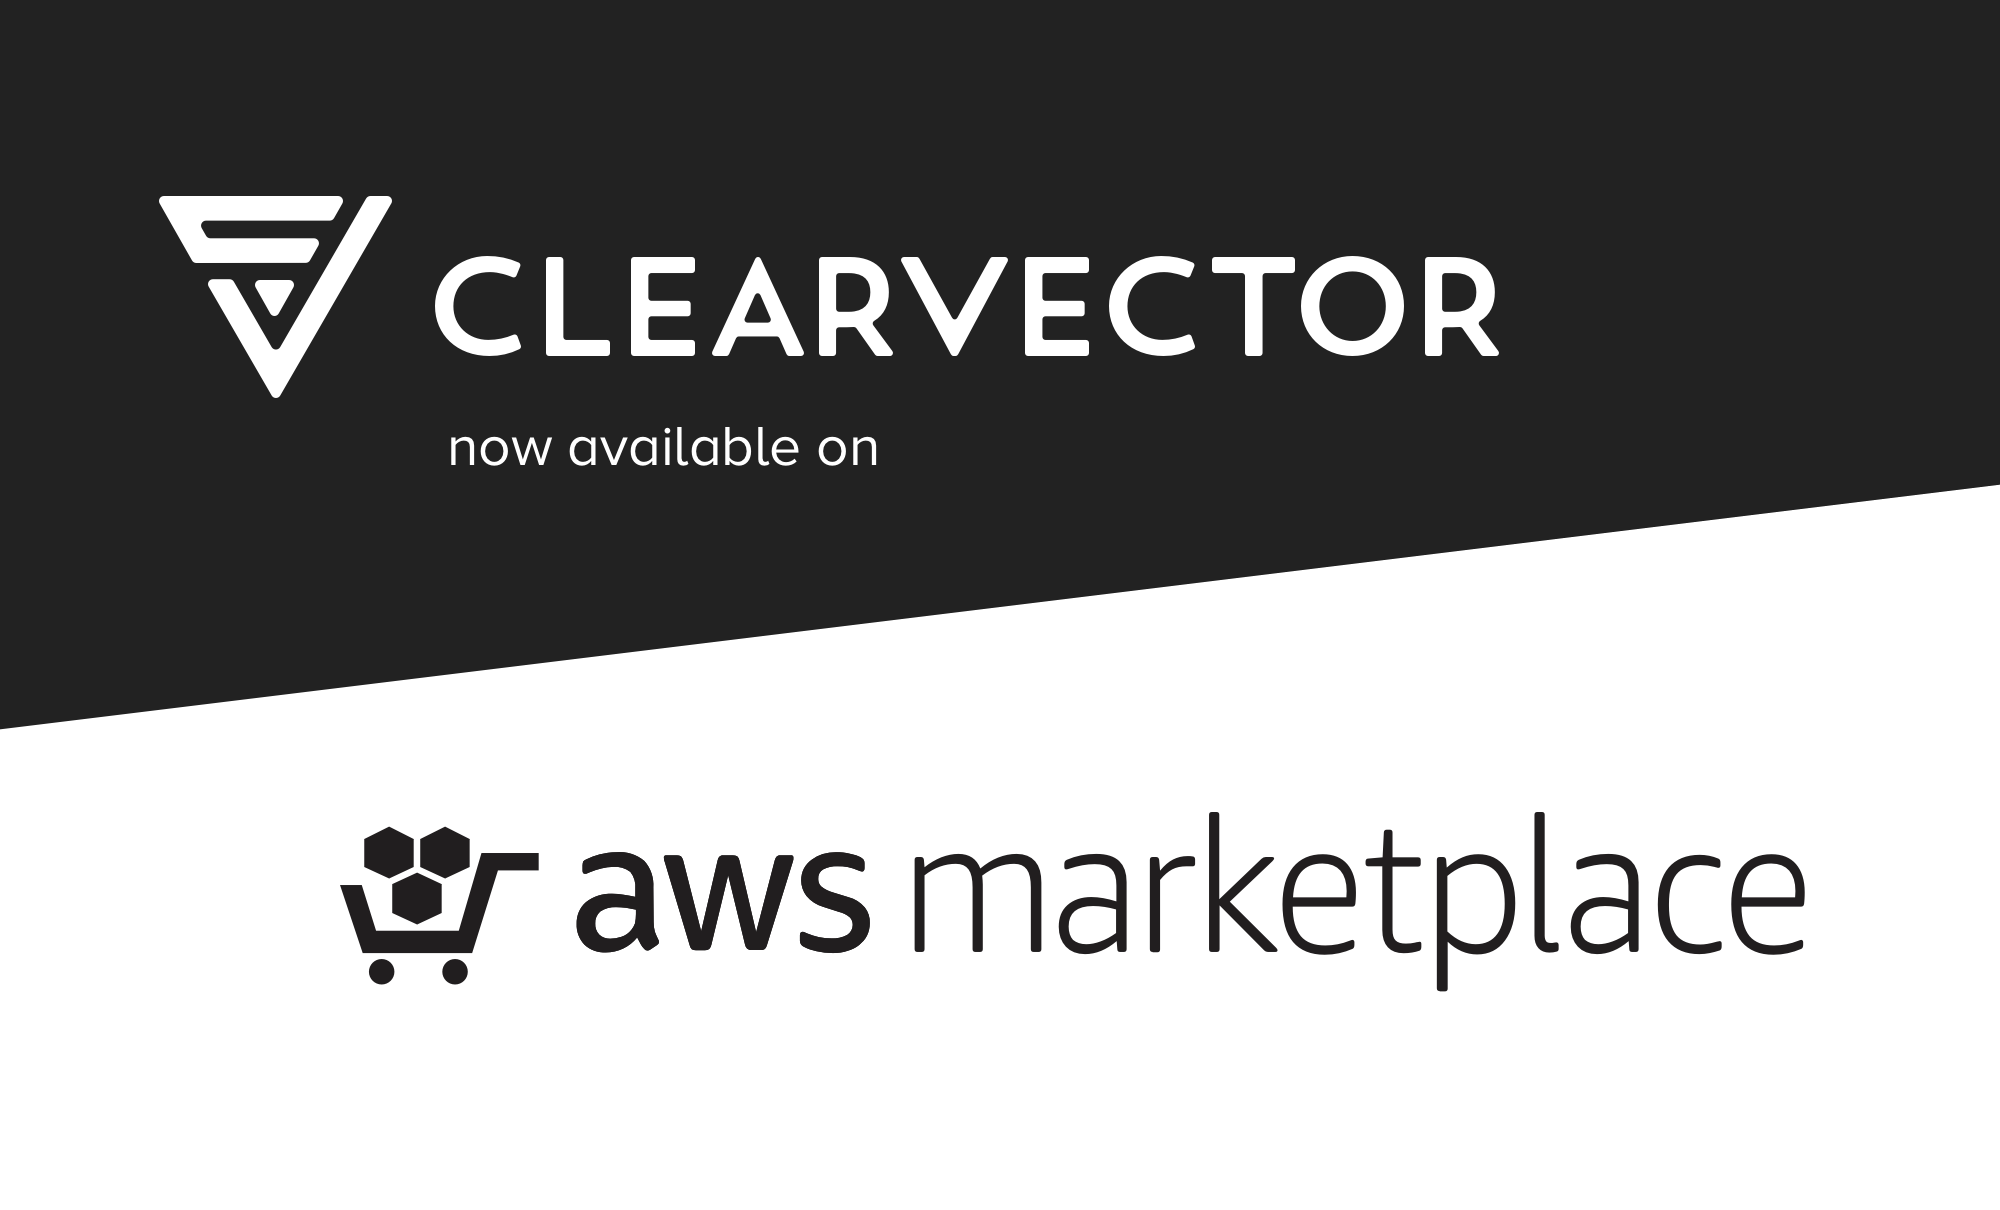 ClearVector is now available on AWS Marketplace